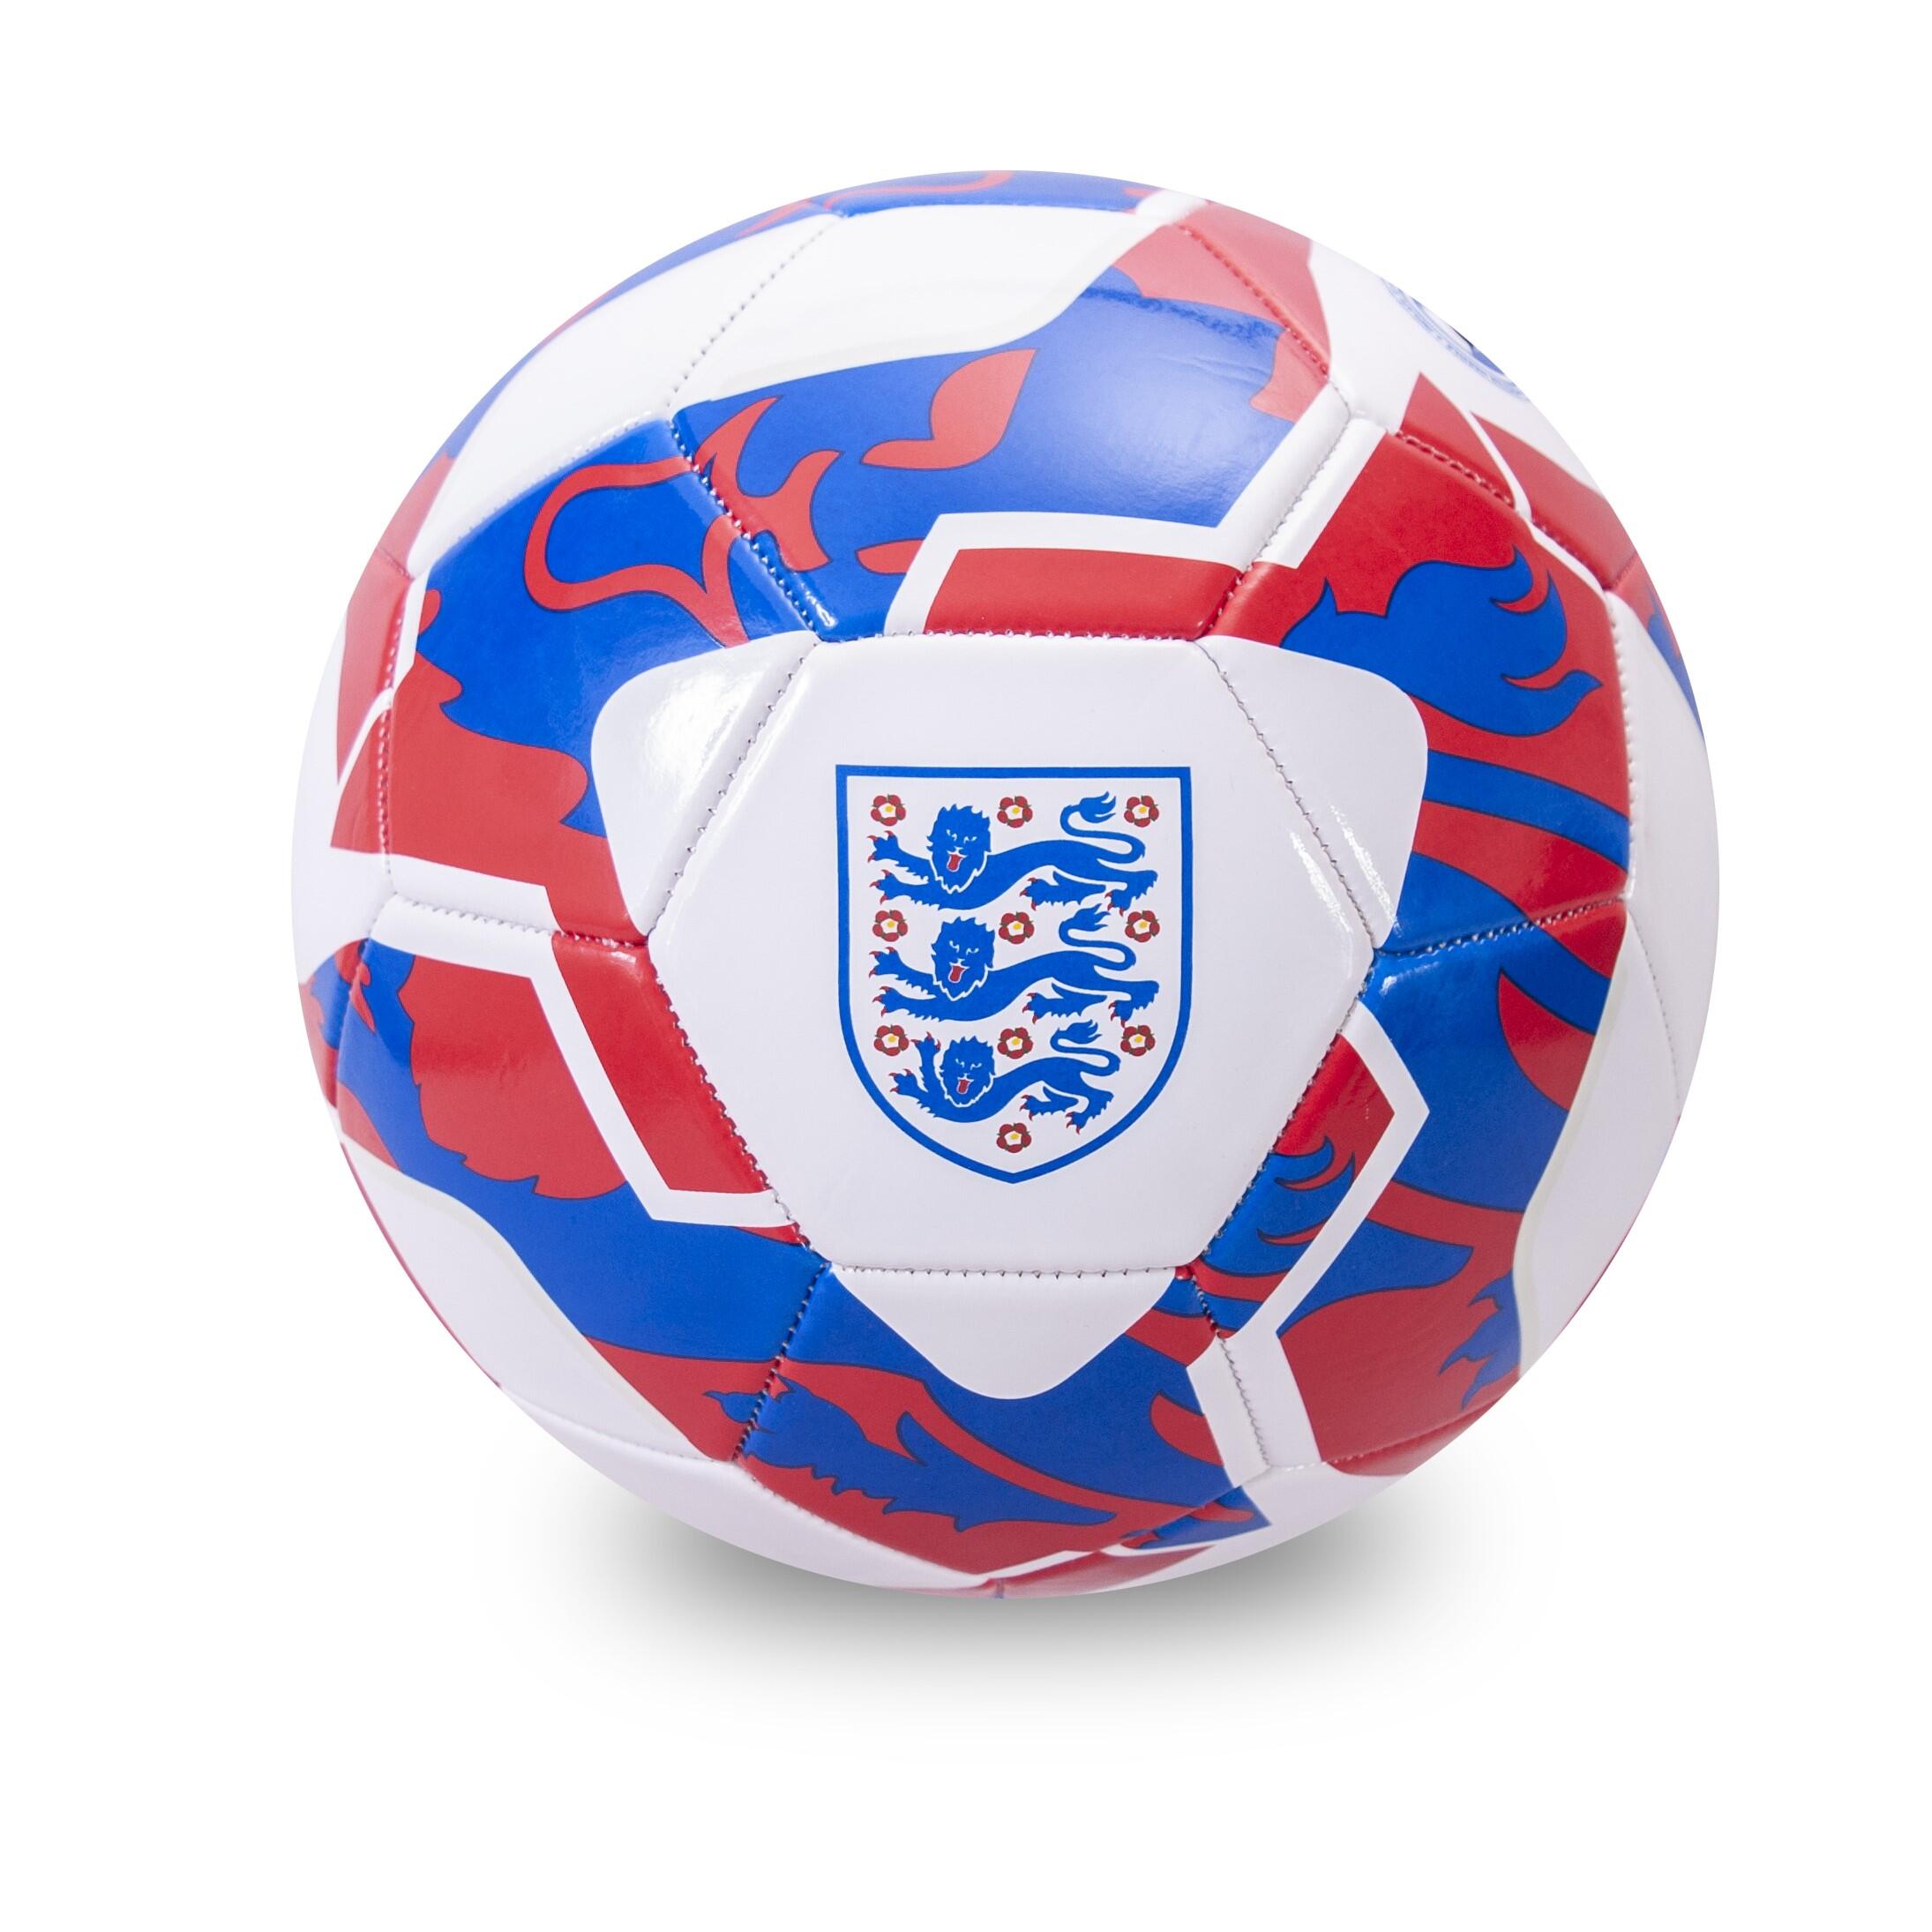 HY-PRO England Supporter Football Size 1 White Blue Red